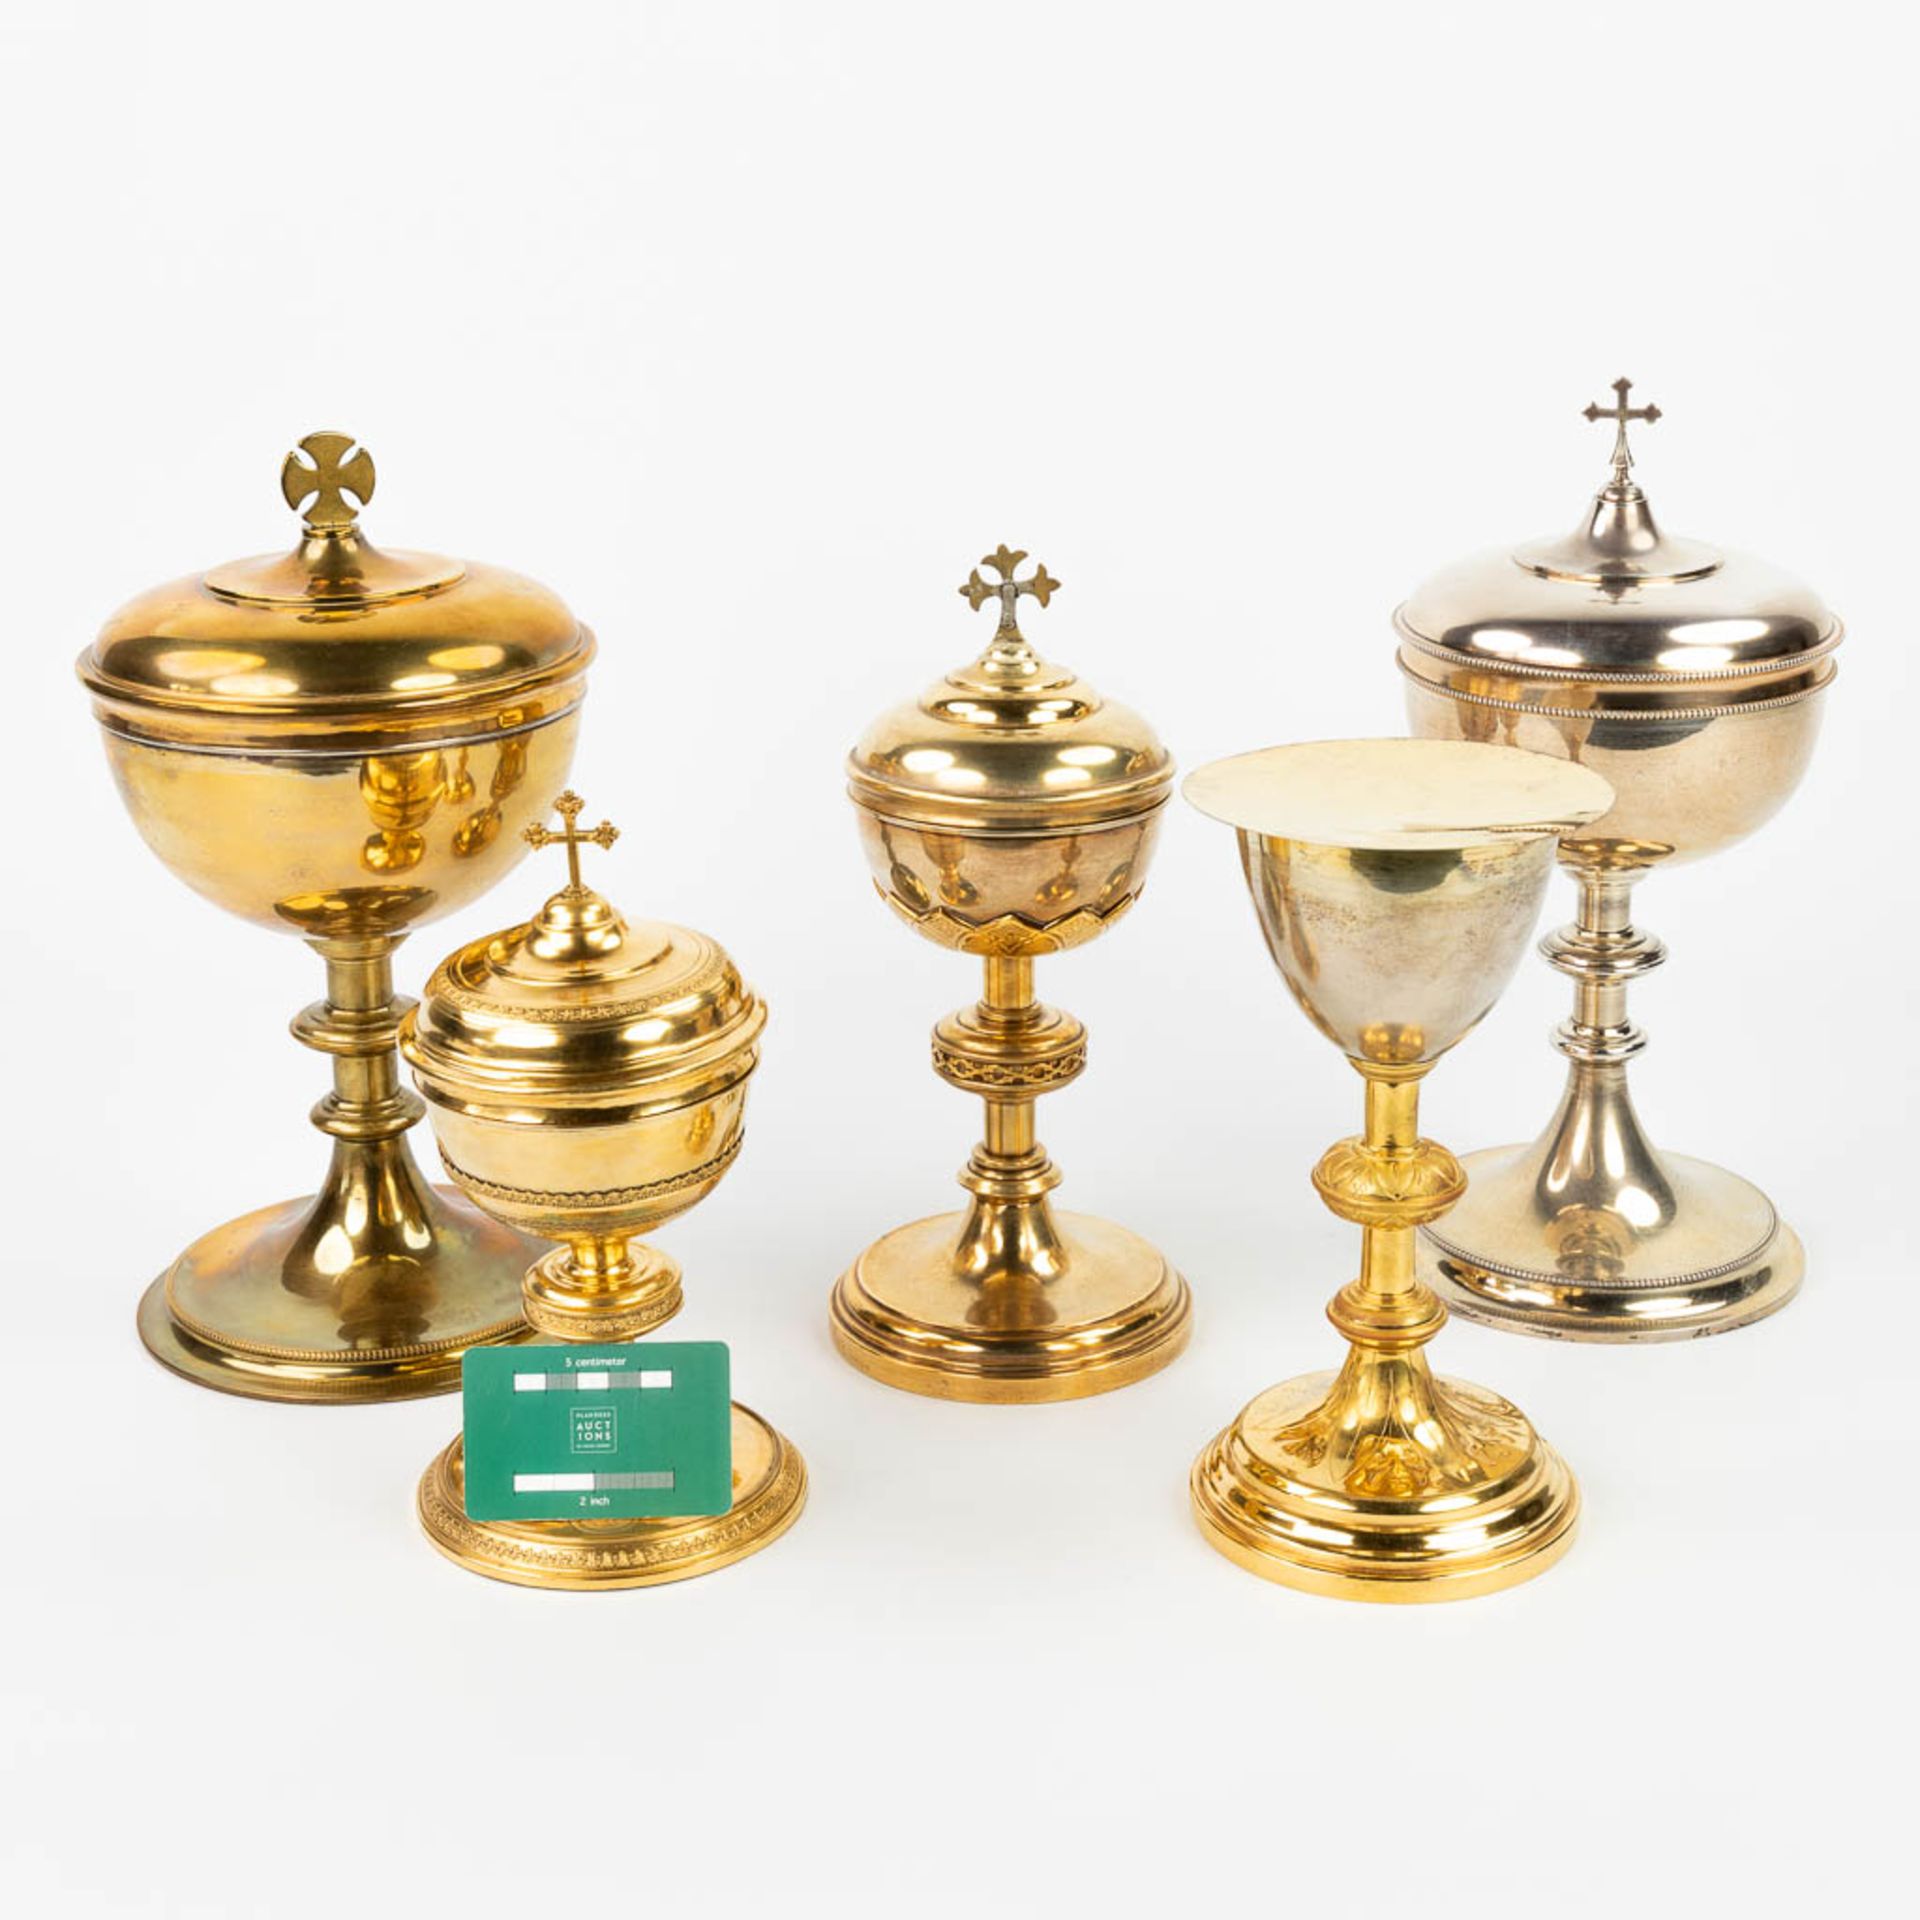 A collection of 4 large ciboria and a chalice made of silver and gold plated metal. - Image 11 of 24